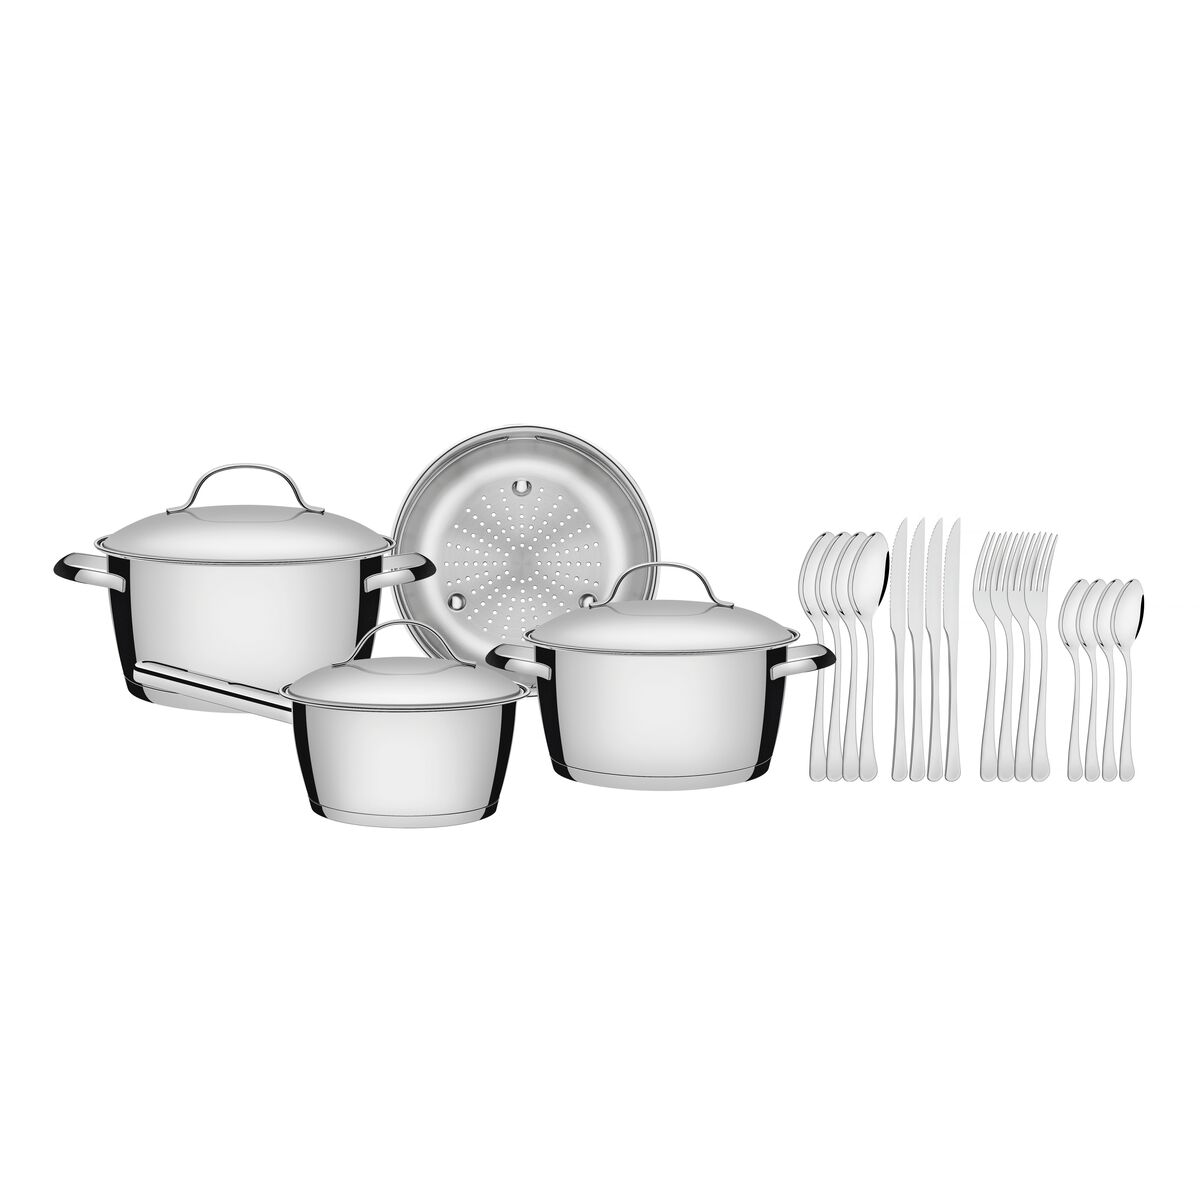 4 pc. stainless steel cookware set with triple-ply bottom.